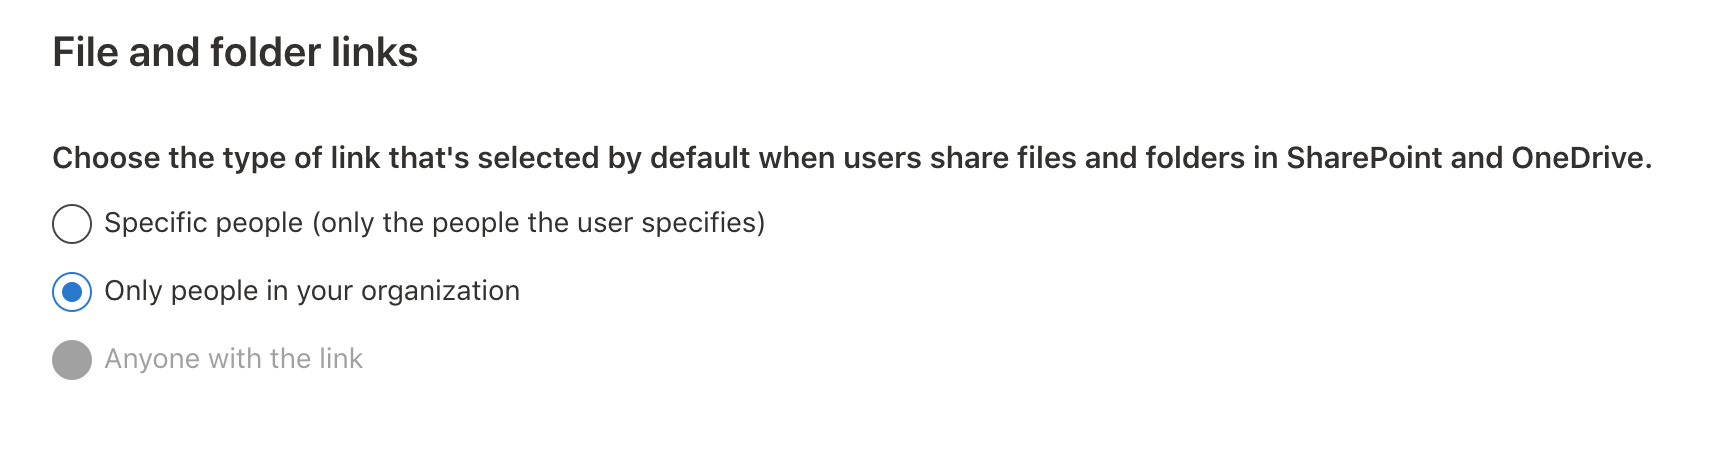 Change the default sharing link in the SharePoint admin center.